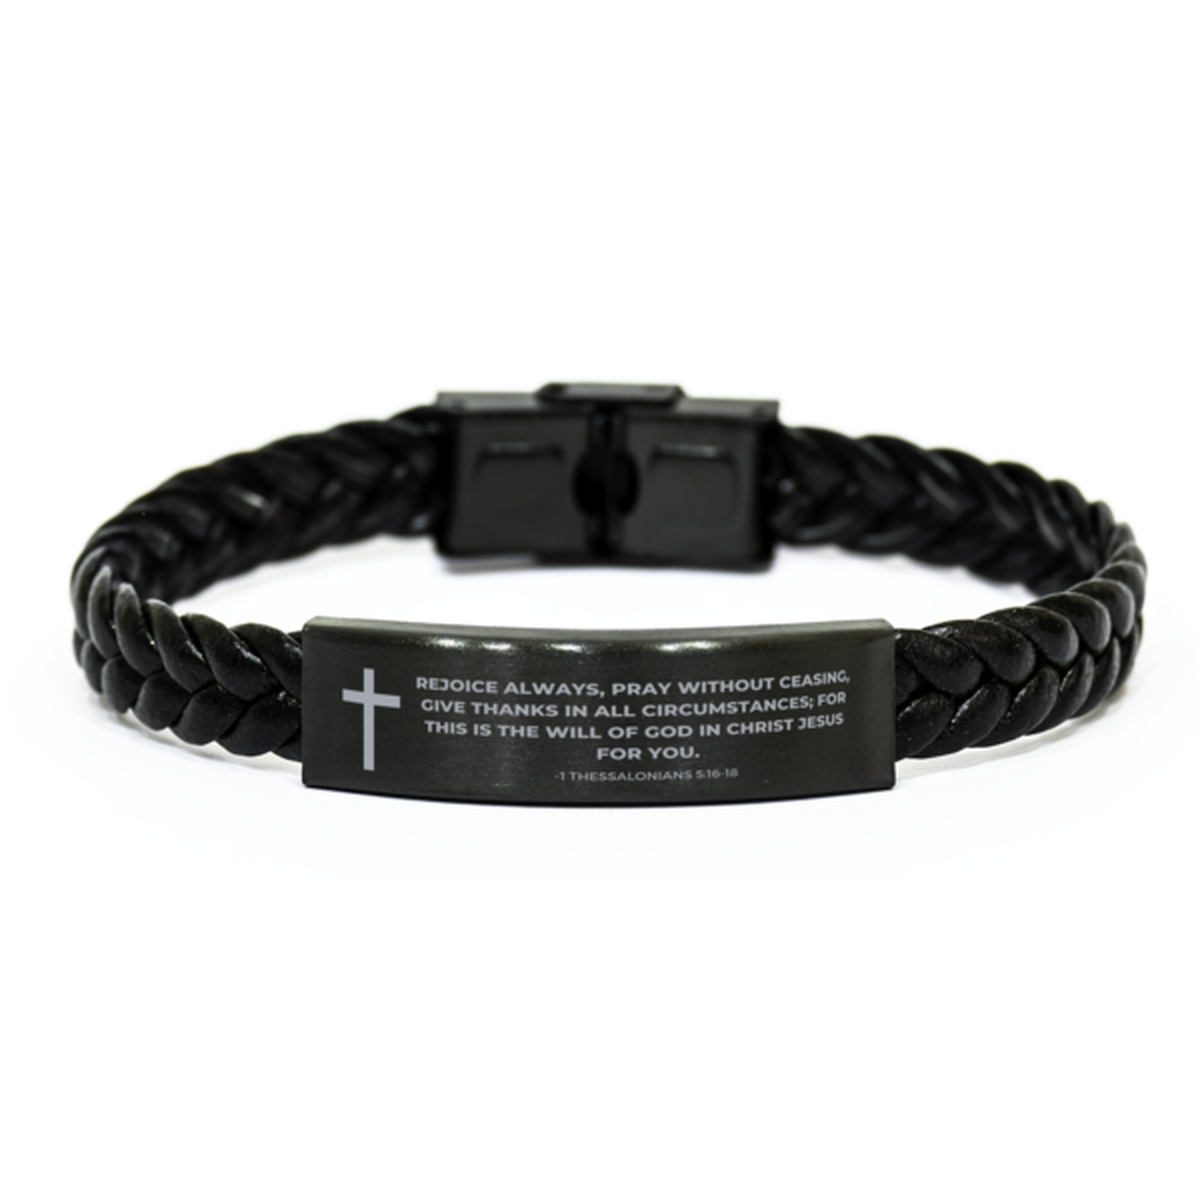 Baptism Gifts For Teenage Boys Girls, Christian Bible Verse Braided Leather Bracelet, Rejoice always, pray without ceasing, Catholic Confirmation Gifts for Son, Godson, Grandson, Nephew